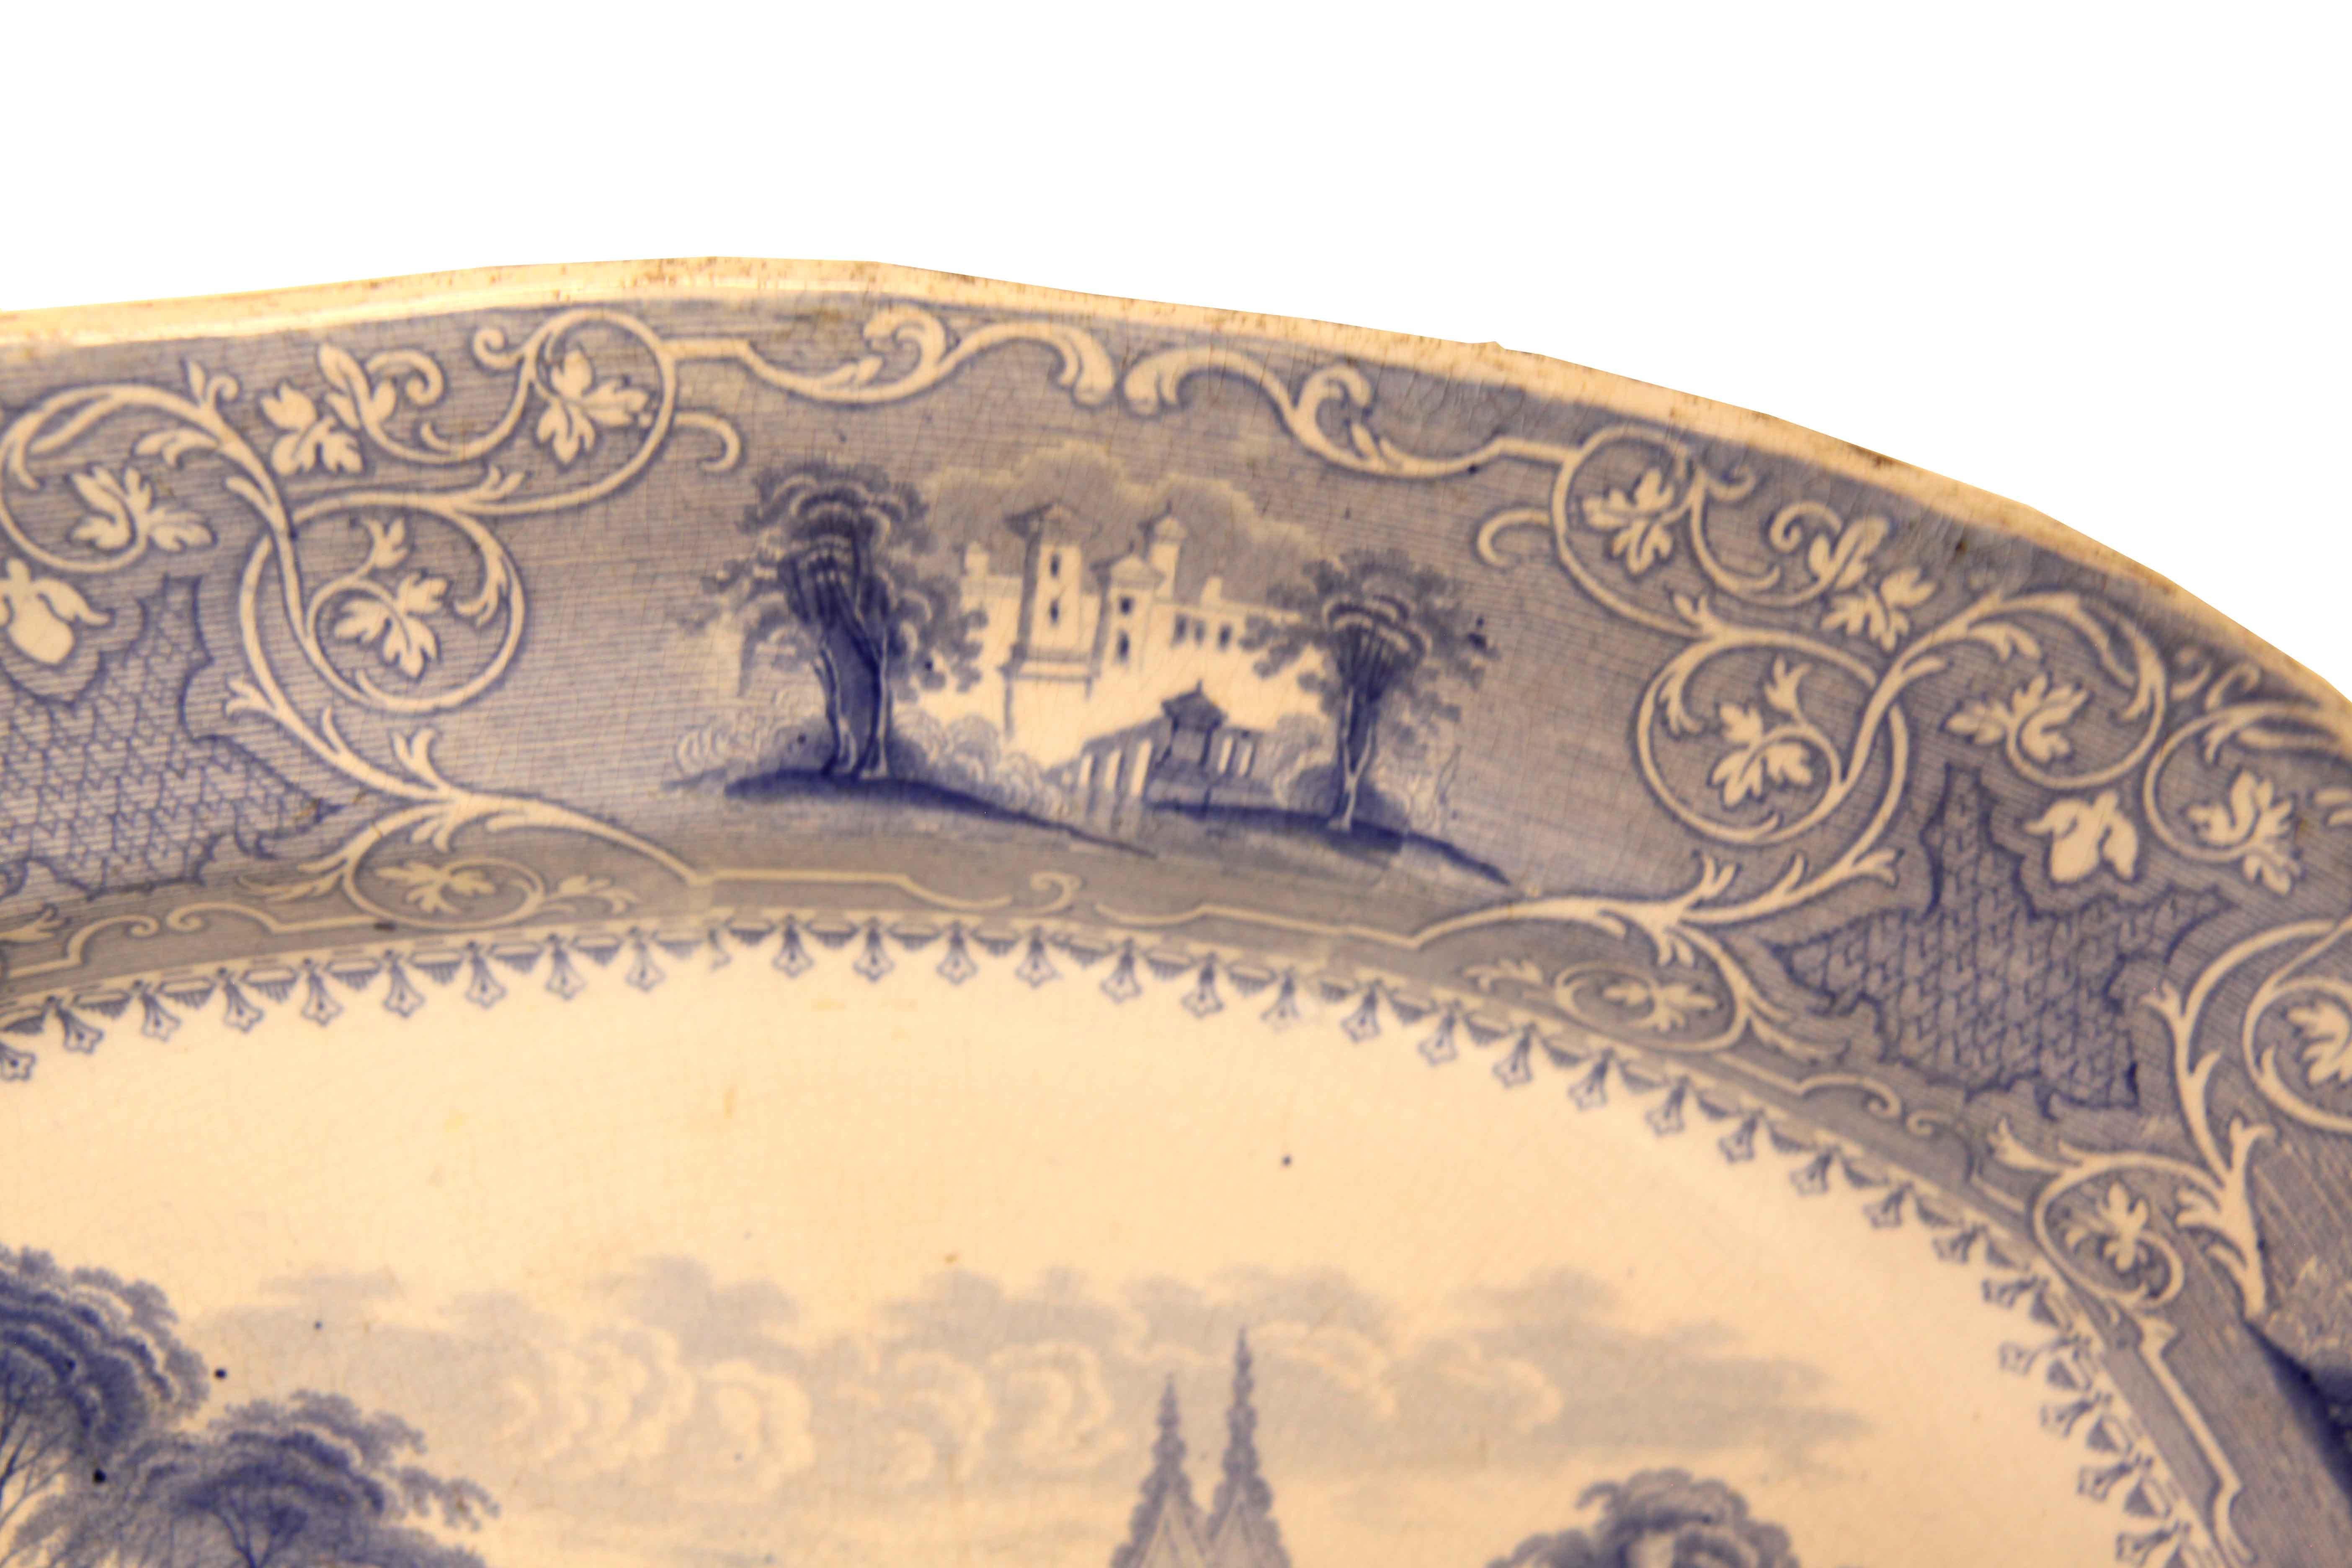 English ironstone blue and white platter from the Staffordshire region, the border features alternating scenes of castles with tress and stylized foliate and arabesques.  The main body depicts a river scene with ladies conversing and a fountain